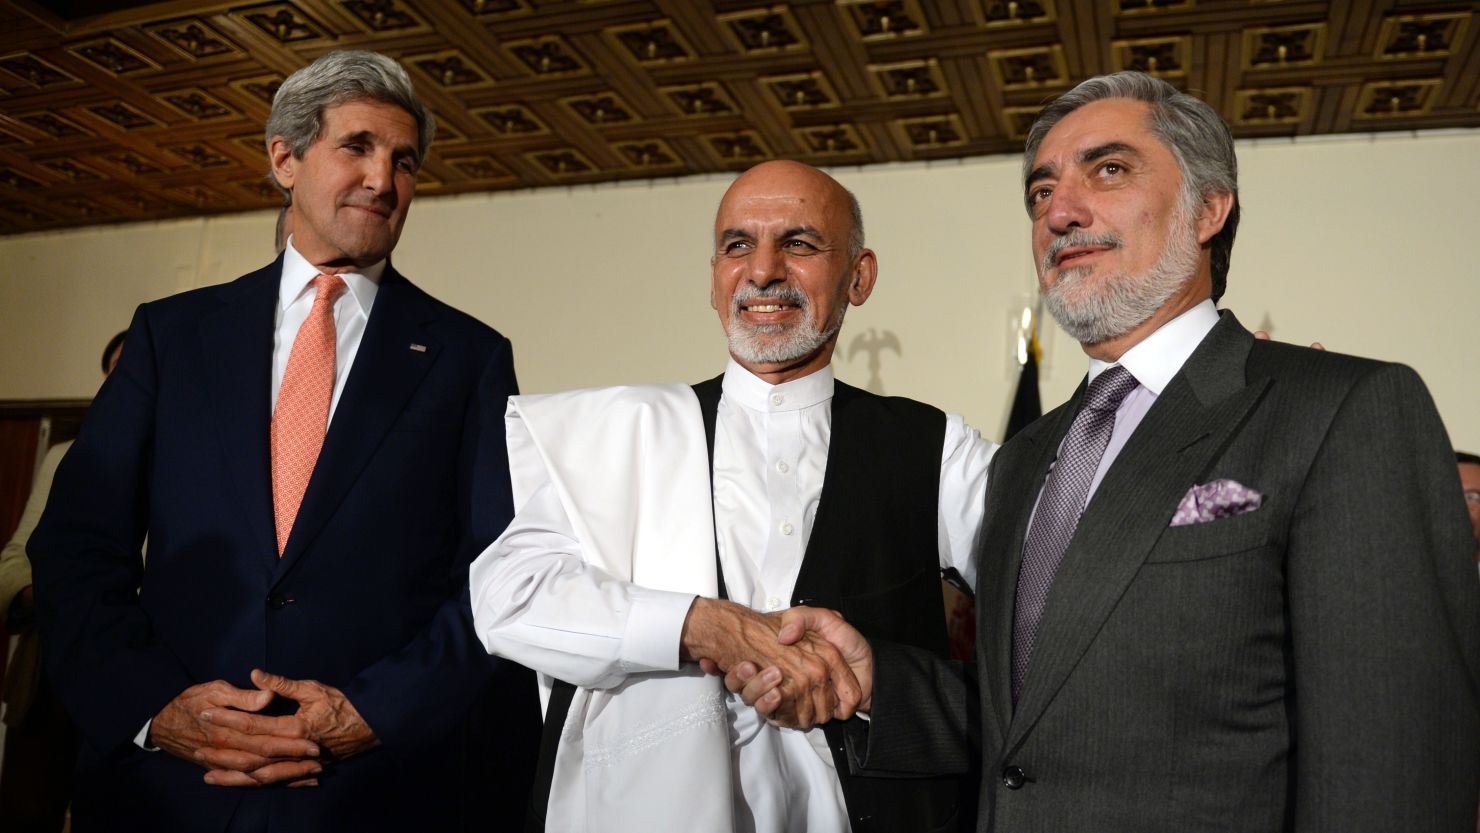 John Kerry appears with Afghan presidential candidates Ashraf Ghani, center, and Abdullah Abdullah last month in Kabul.